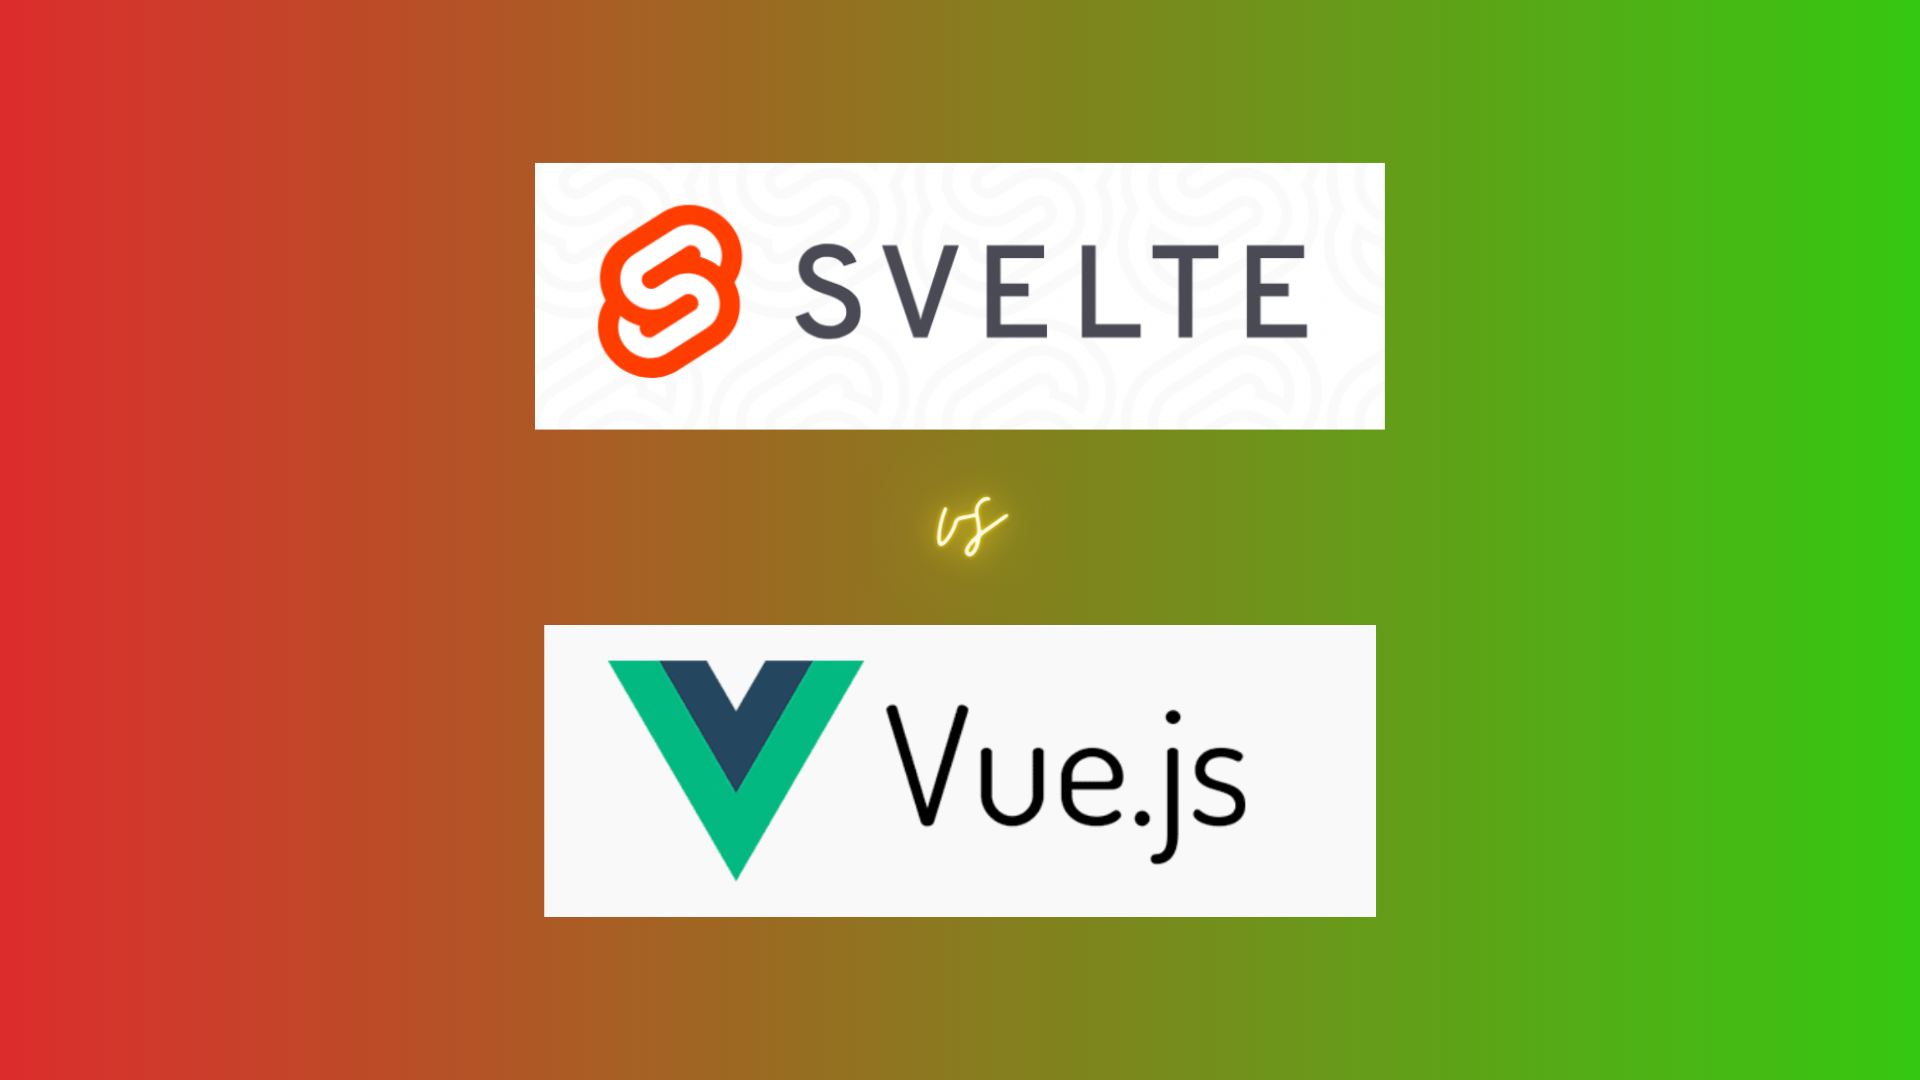 Svelte vs Vue.js on blended red and green background with logos. 